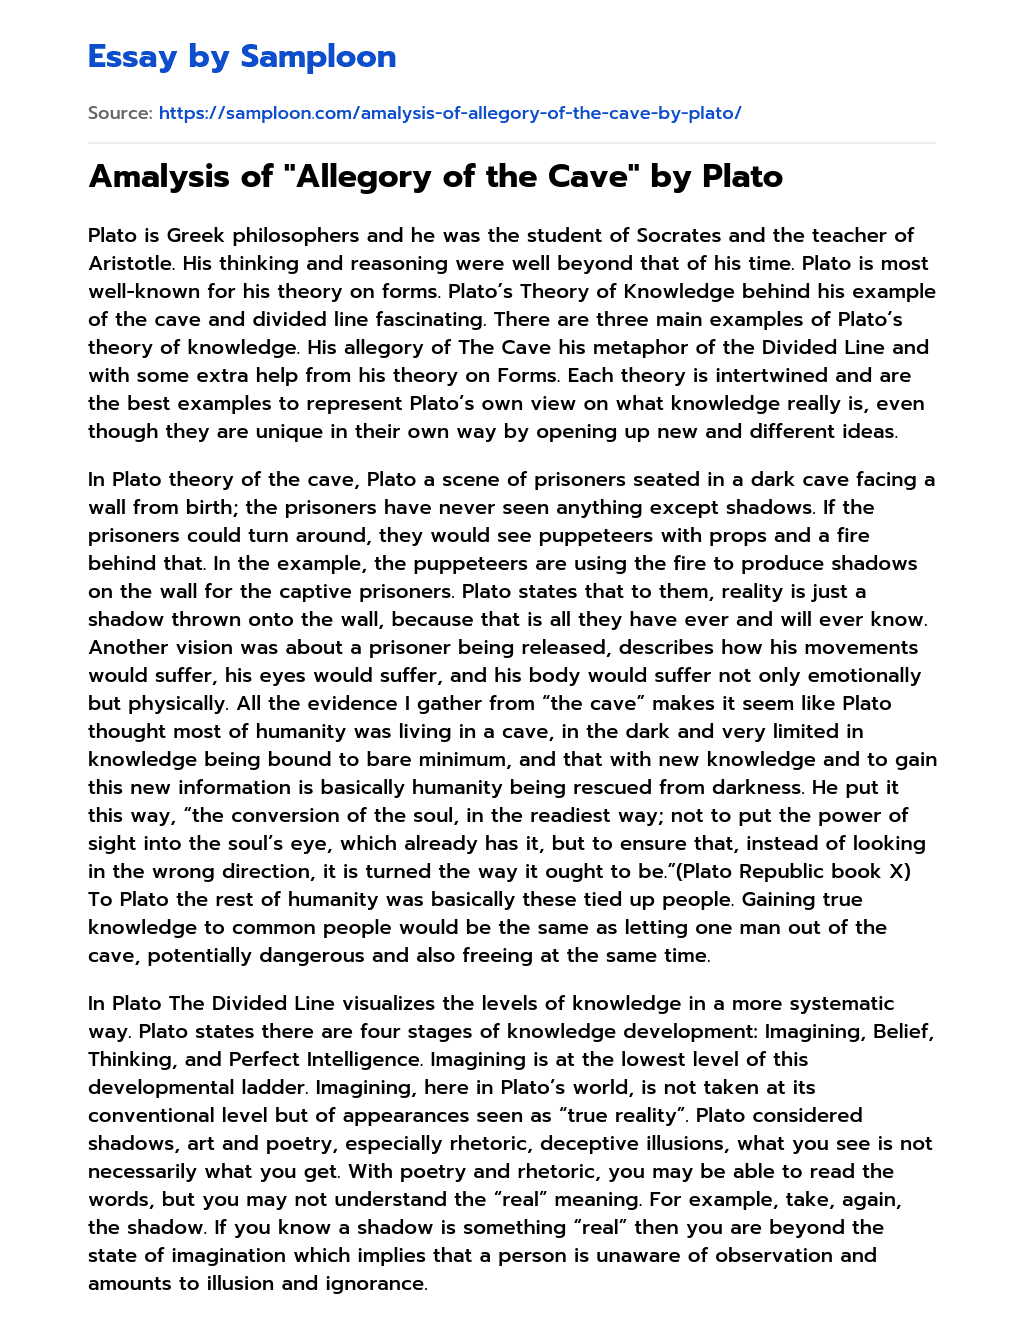 Amalysis of “Allegory of the Cave” by Plato essay